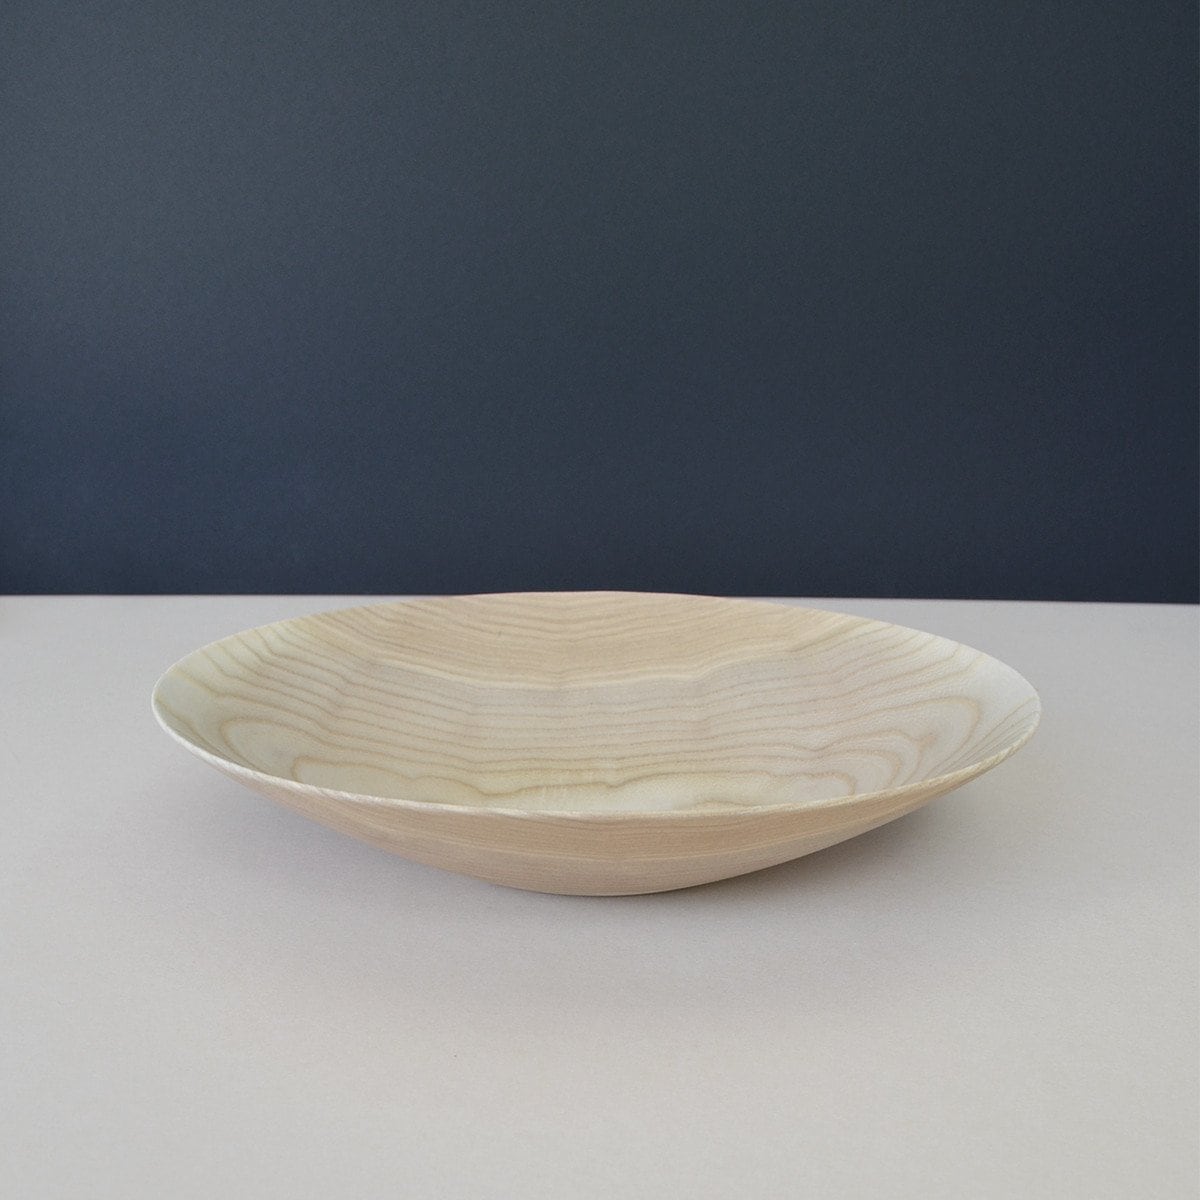 A Kihachi Wooden Plate - Small on a table with a dark background.